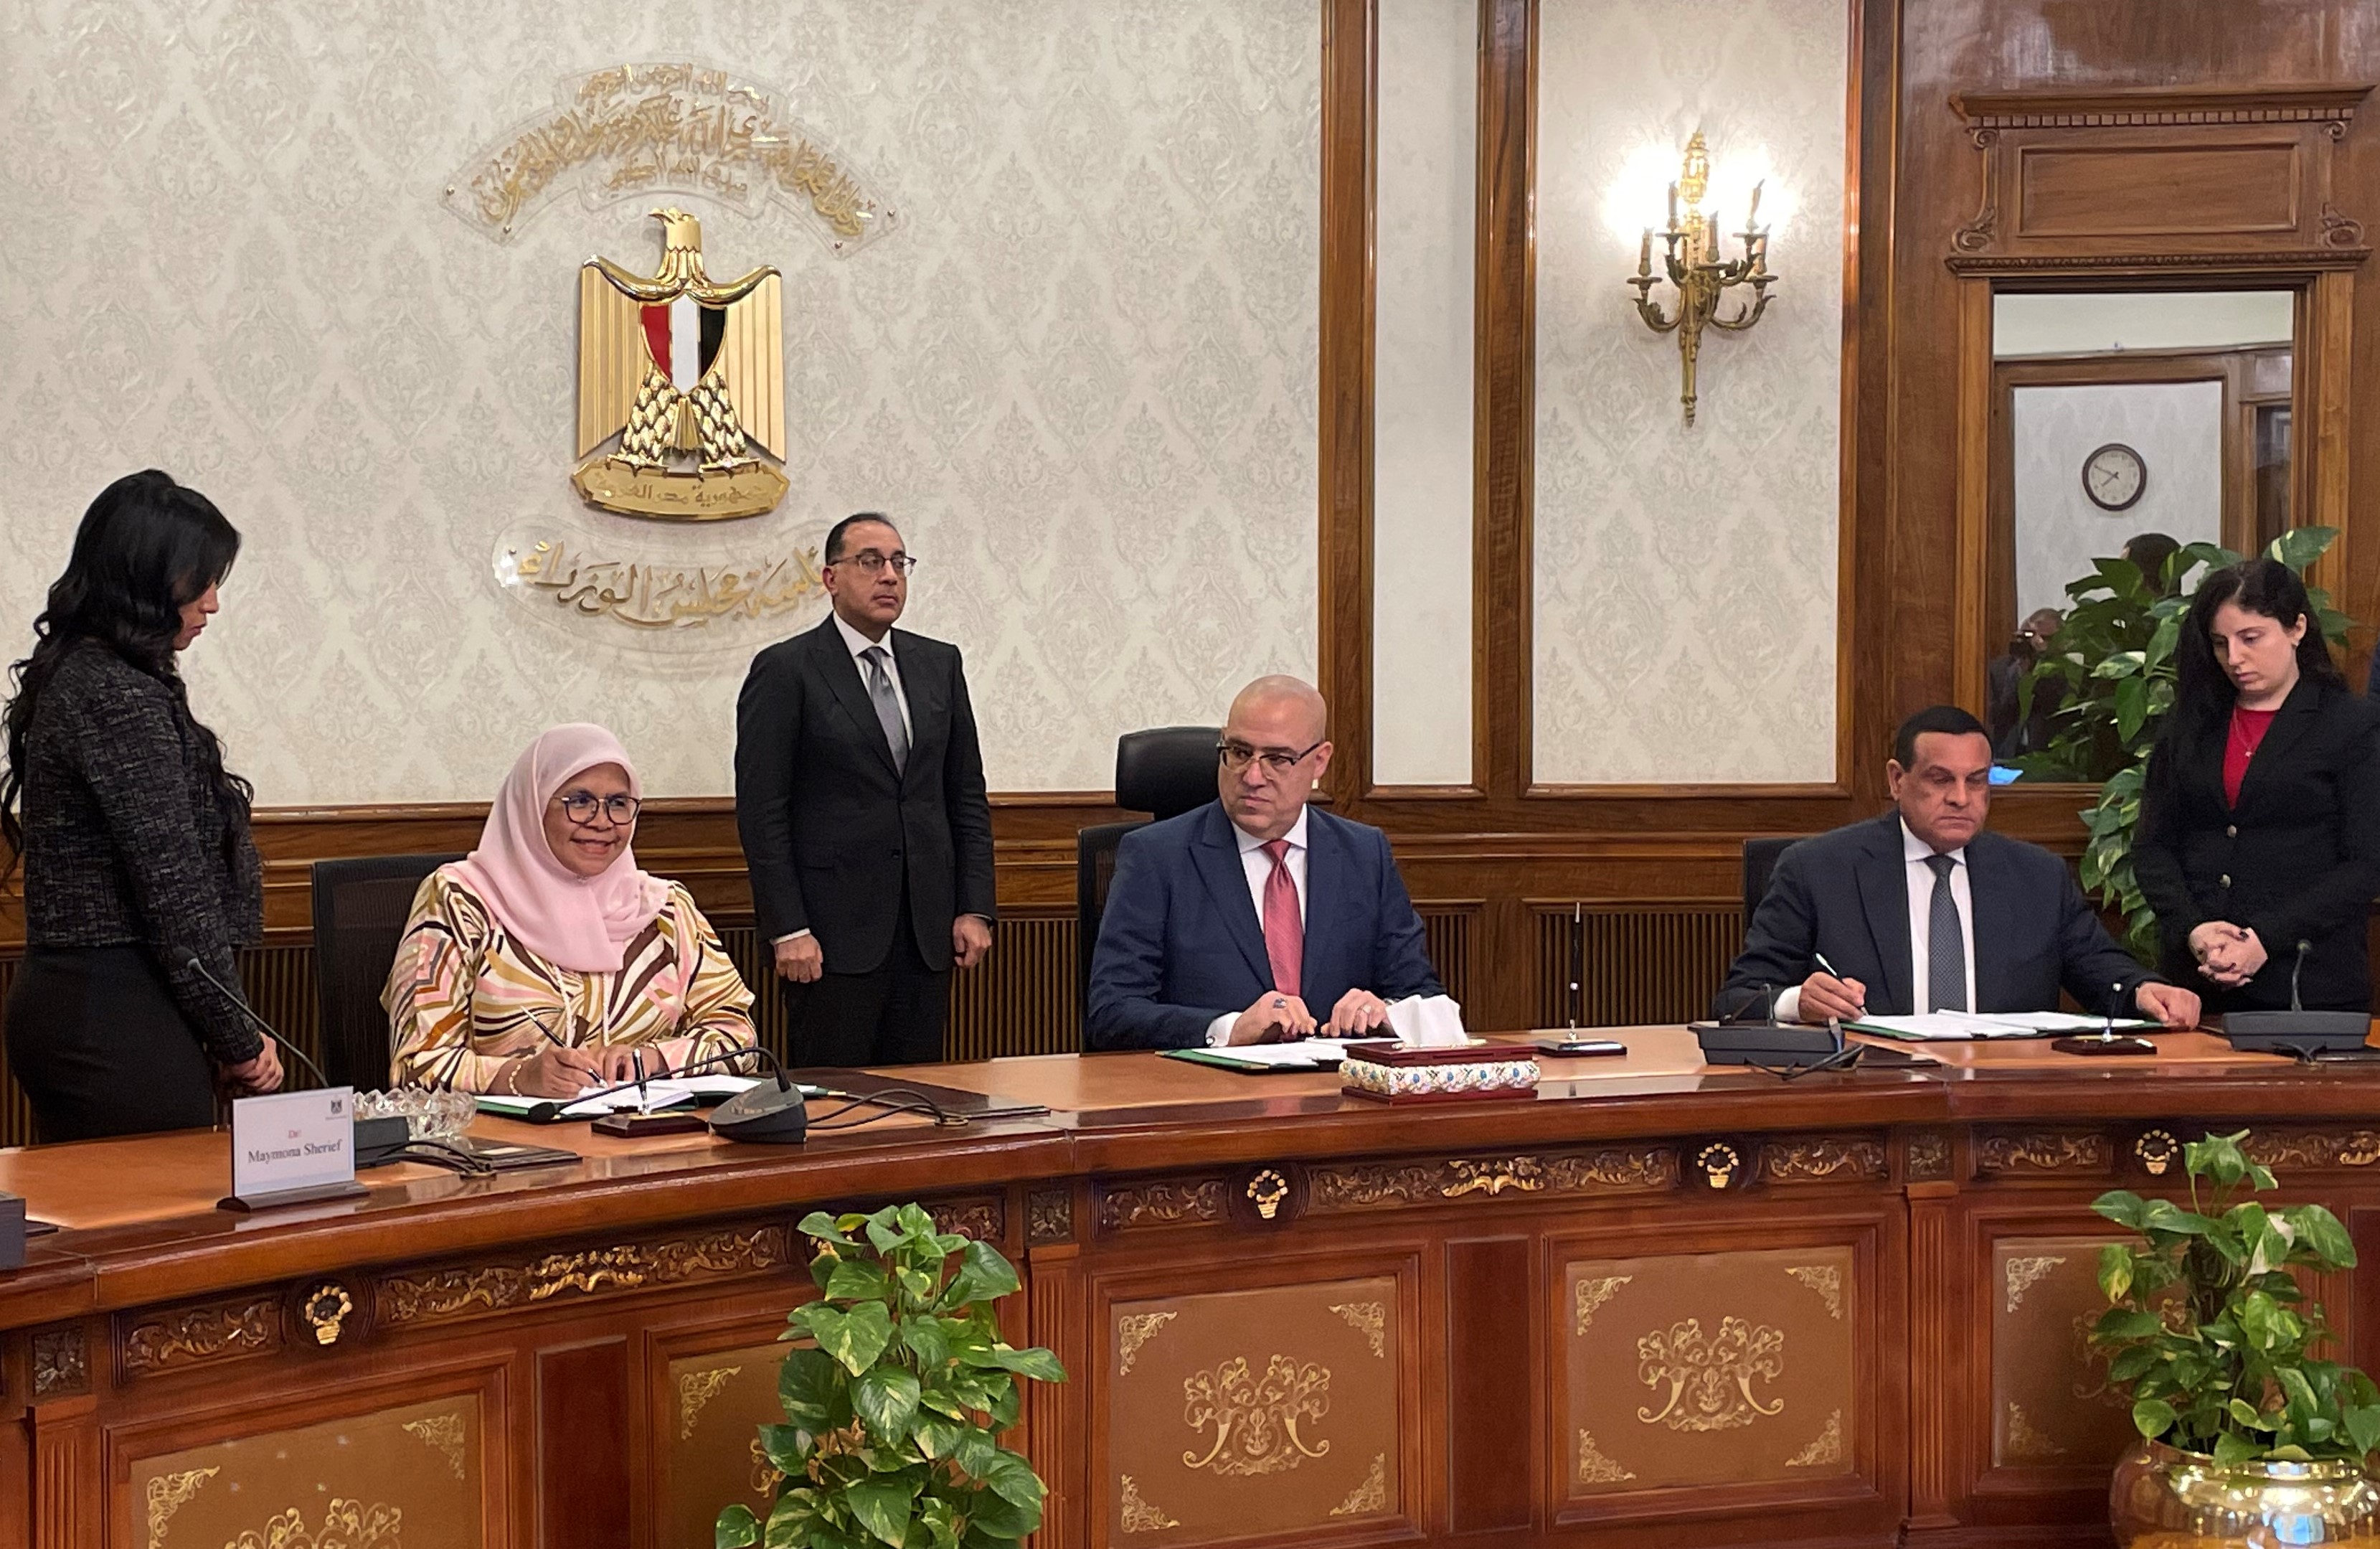 Signature of the WUF12 agreement at the Egyptian cabinet in the presence of Prime Minister of Egypt Dr. Mostafa Madbouly